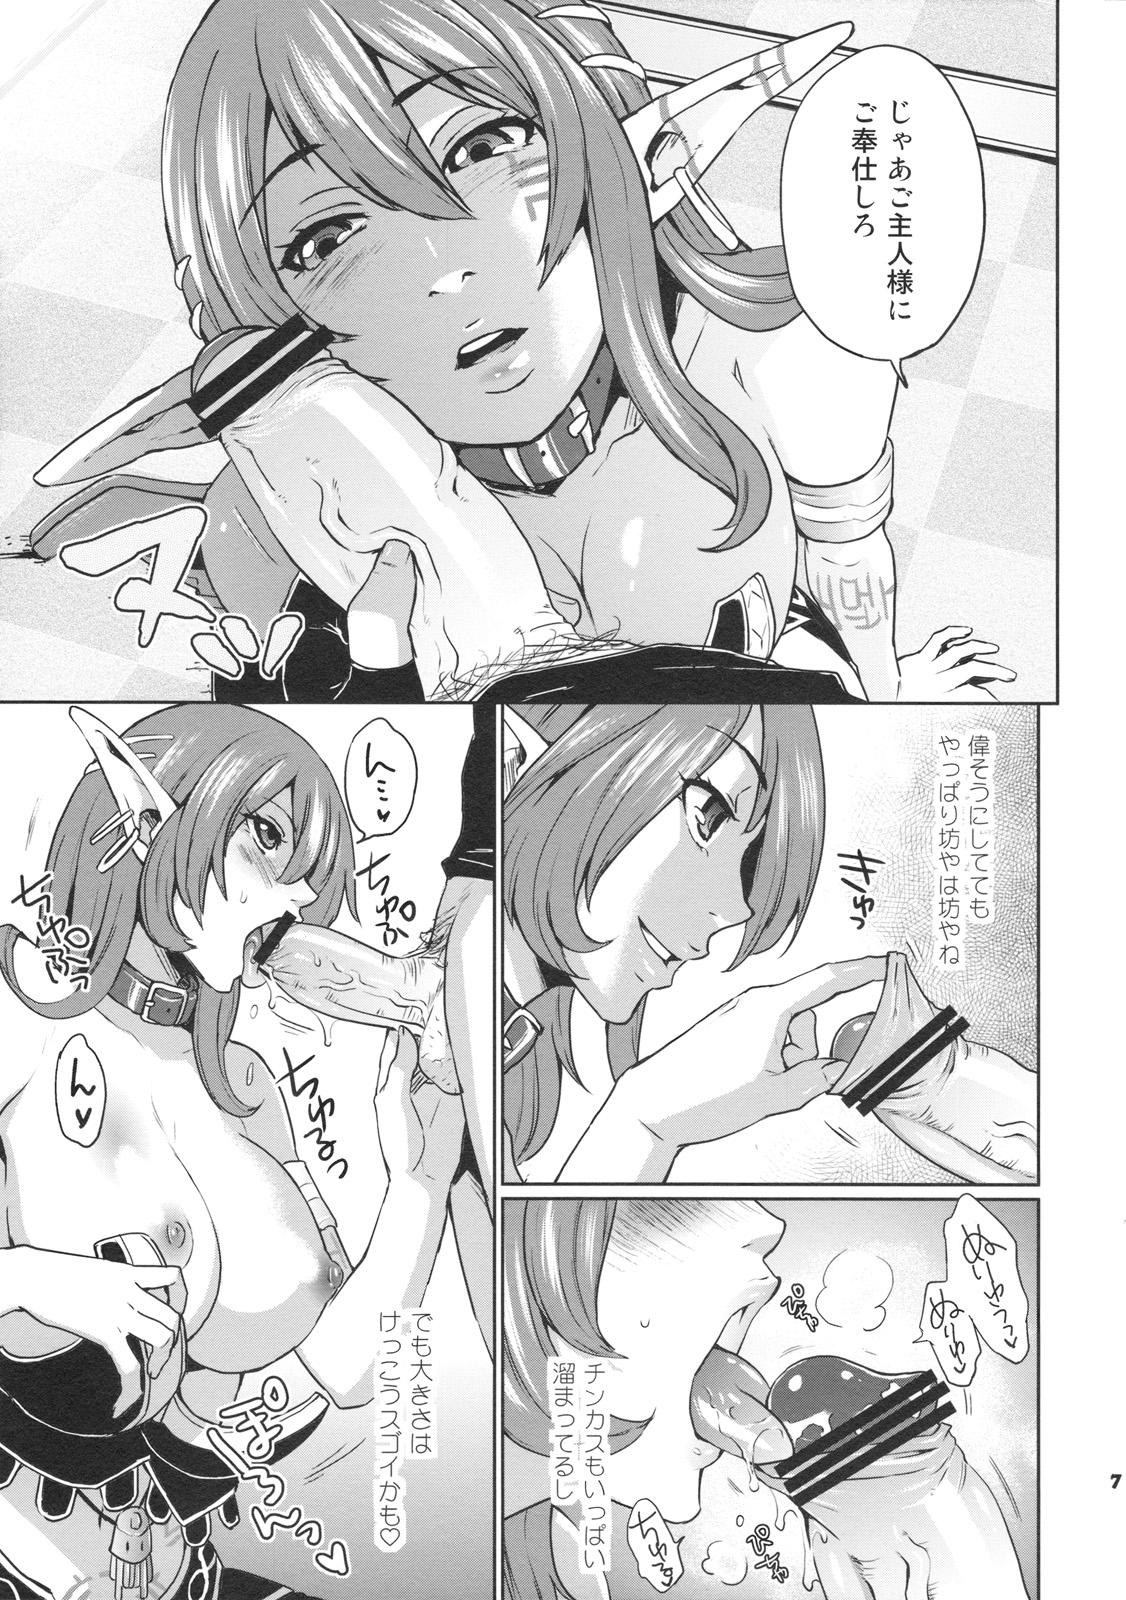 Transsexual Hoshi no Umi no Miboujin - The Widow of The Star Ocean - Star ocean 4 Amatoriale - Page 7